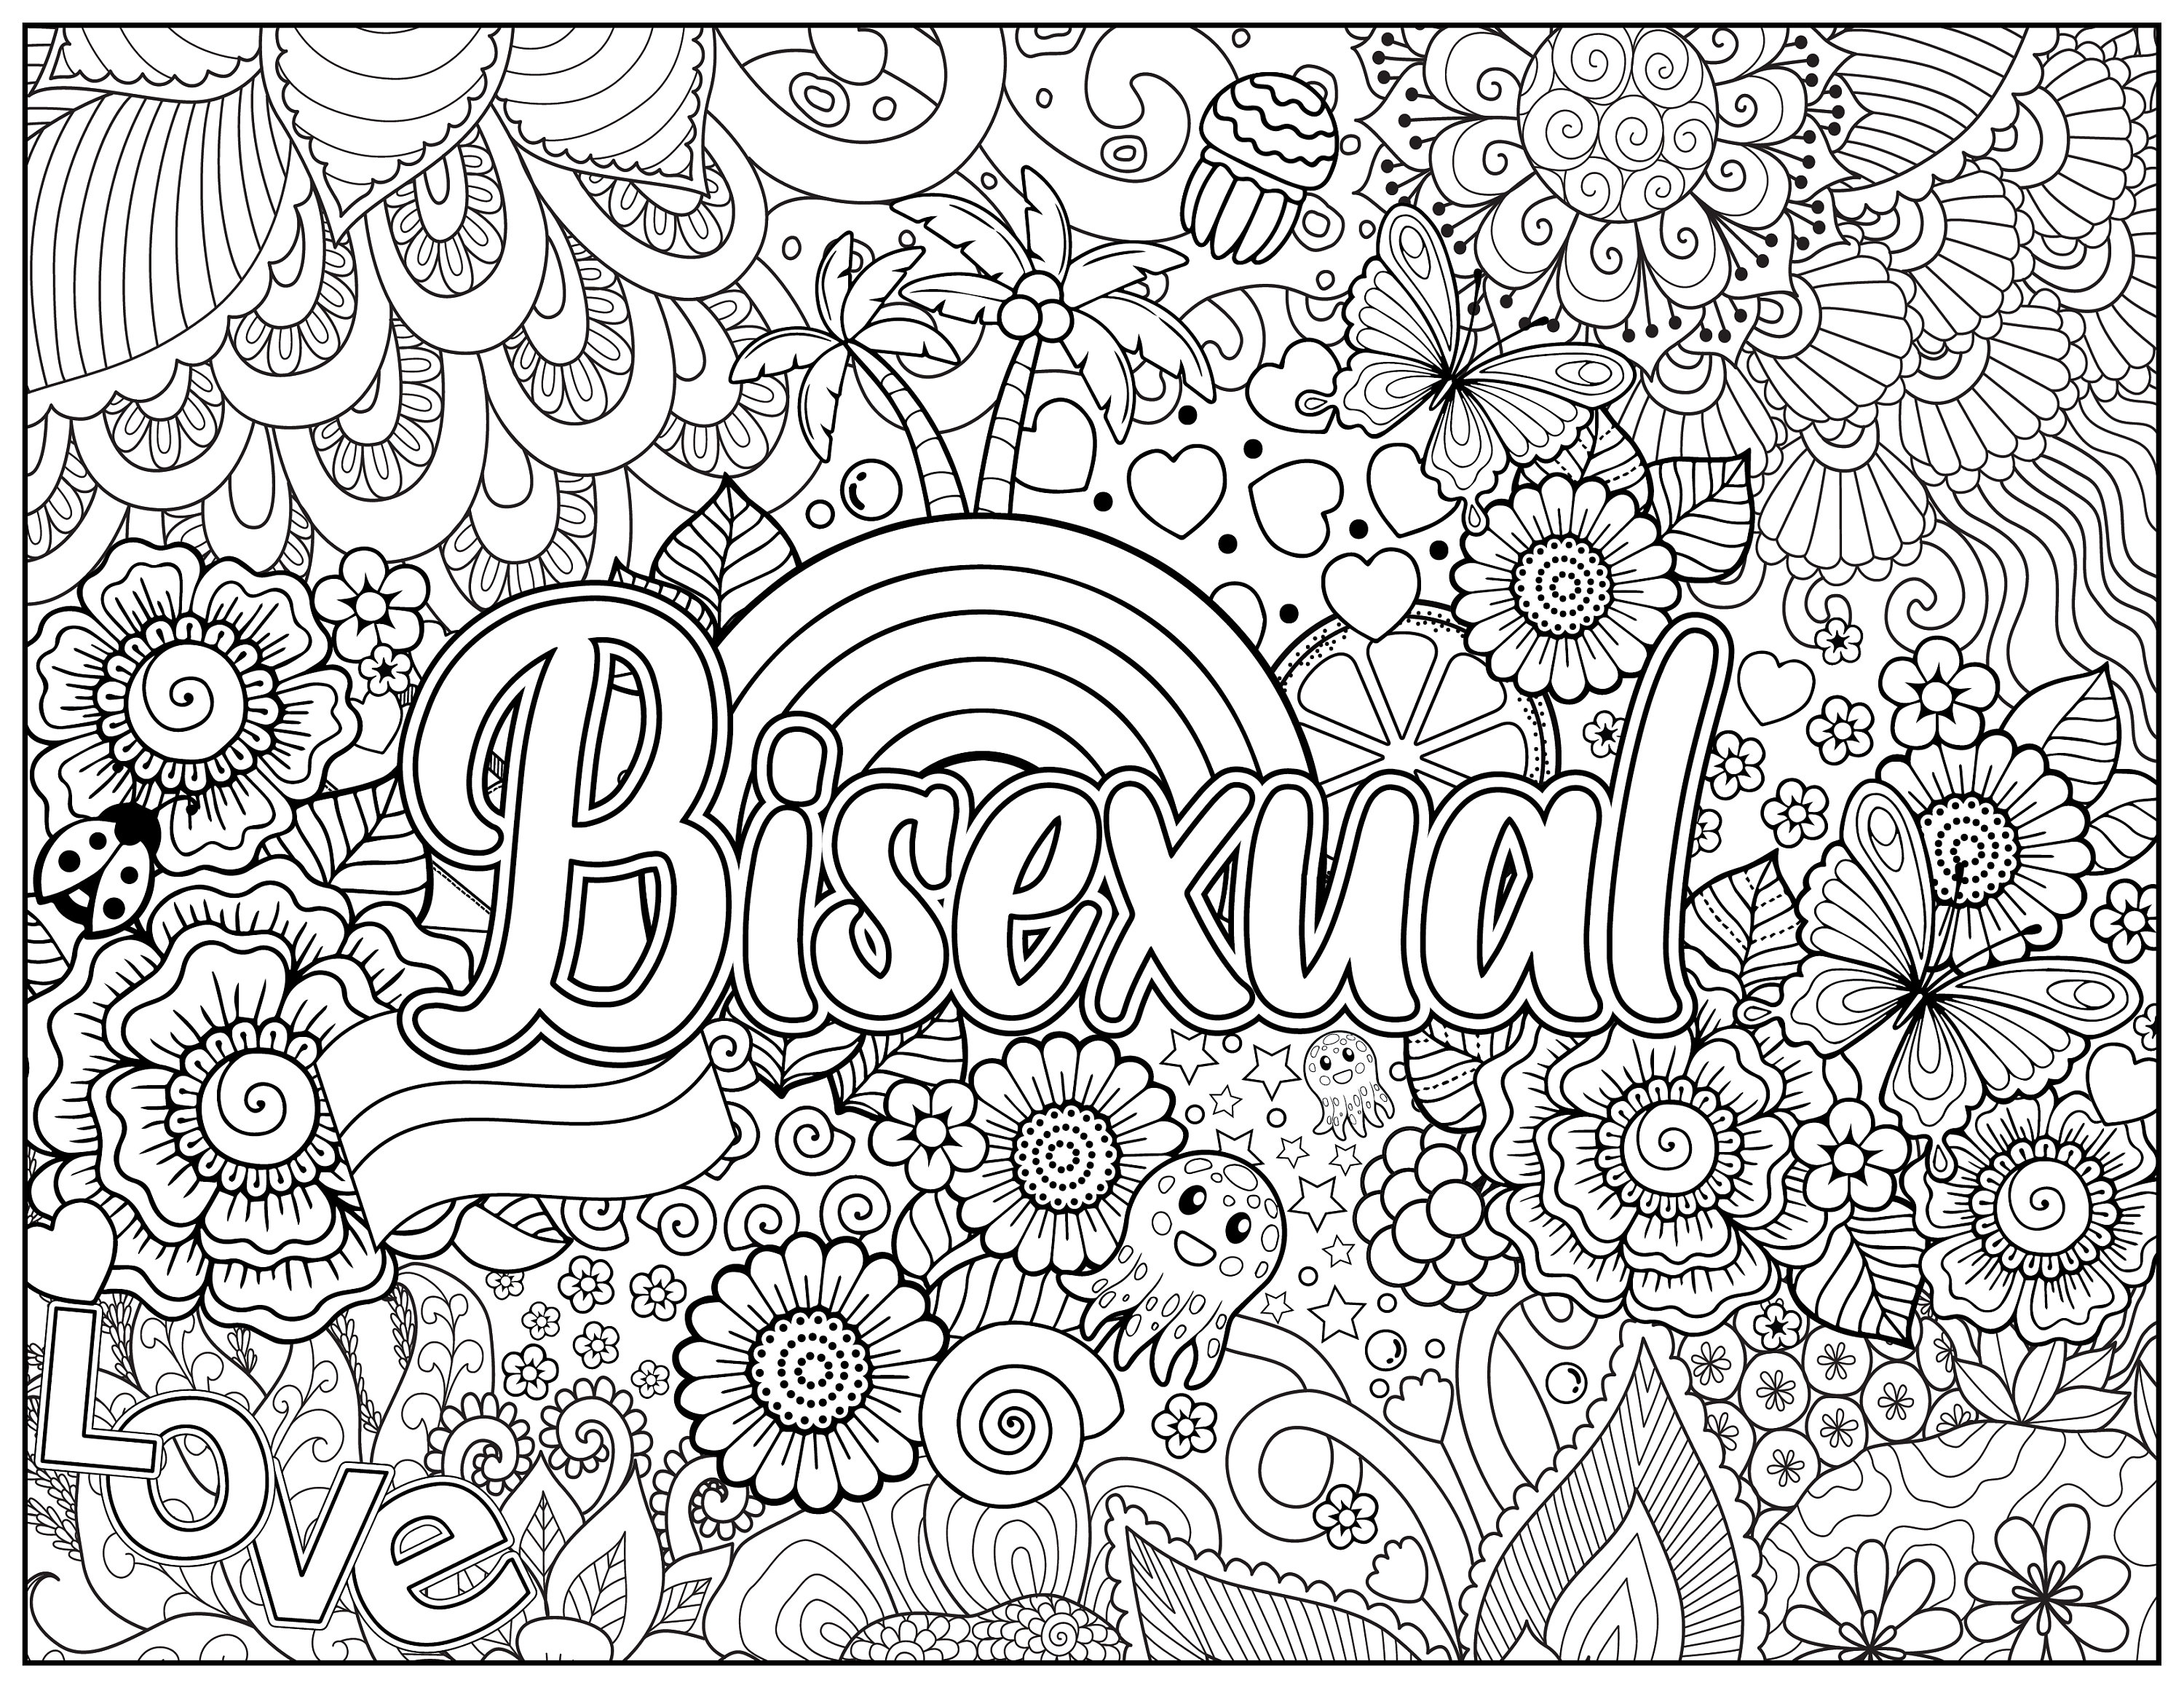 Pride Colouring Pride Coloring Printable Colouring Page - Etsy